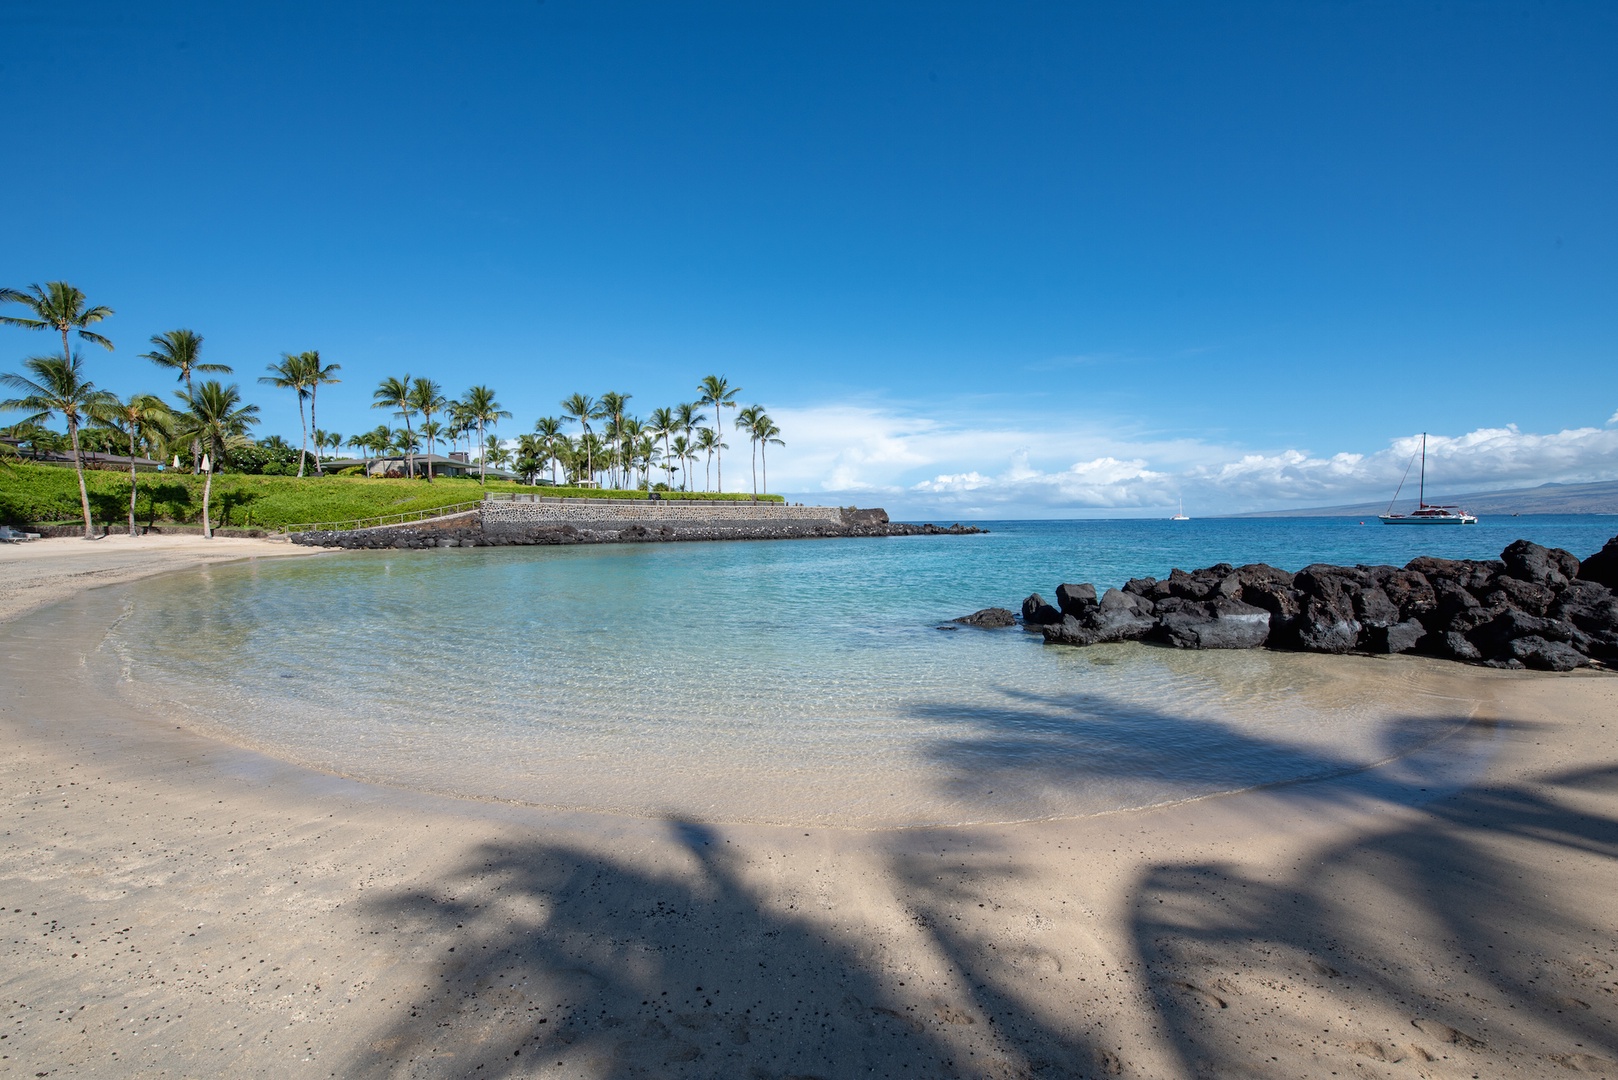 Kamuela Vacation Rentals, 3BD Ke Kailani (1C) at Mauna Lani Resort - This Kohala Coast vacation home on the Big Island of Hawaii allows easy access (5 minutes drive) to the white sands of magnificent Mauna Lani Beach and the exclusive Mauna Lani Beach Club